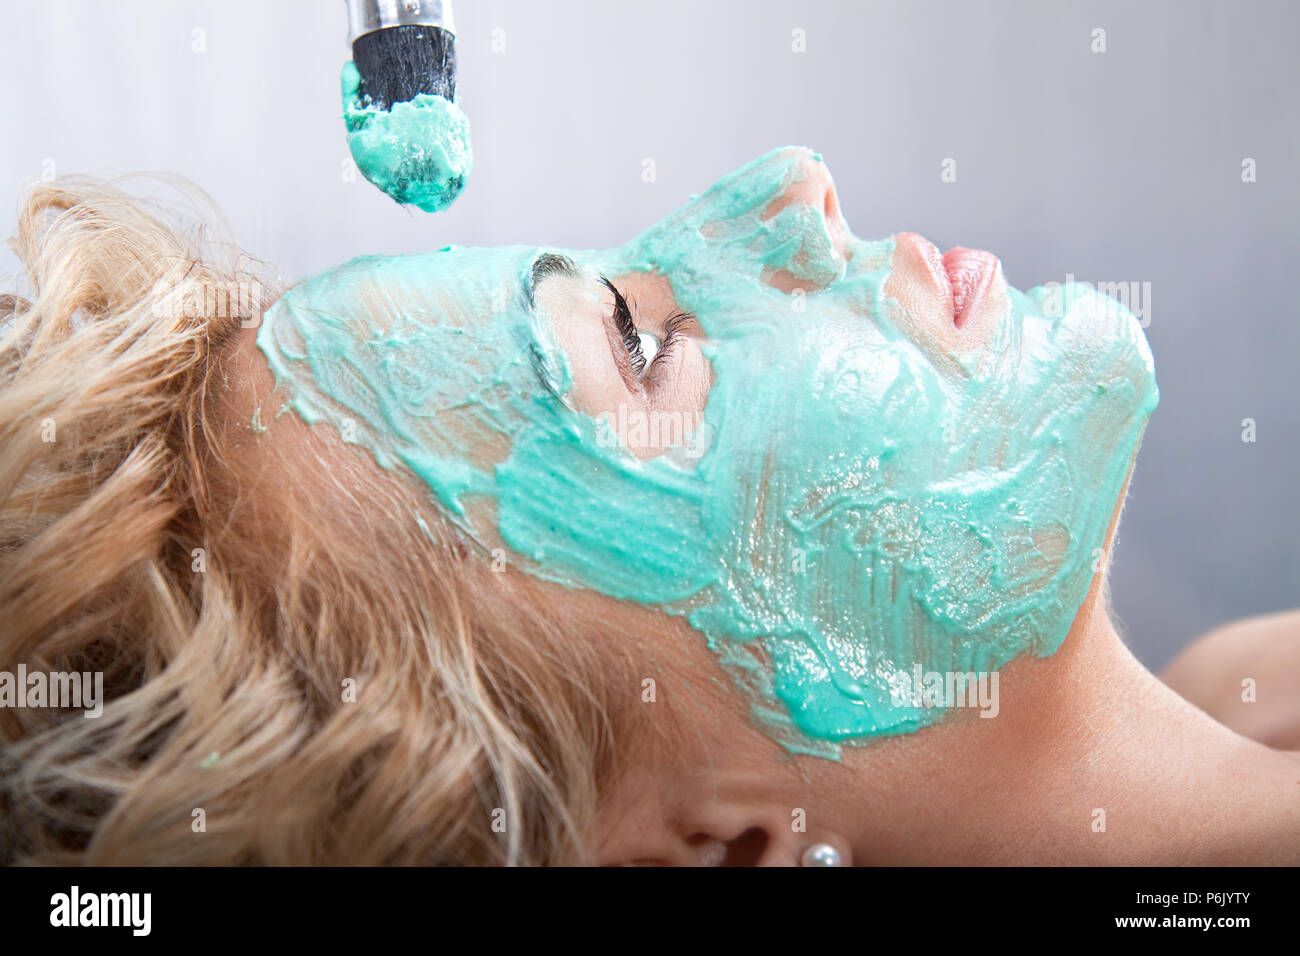 Applying mud face pack on woman face with brush Stock Photo